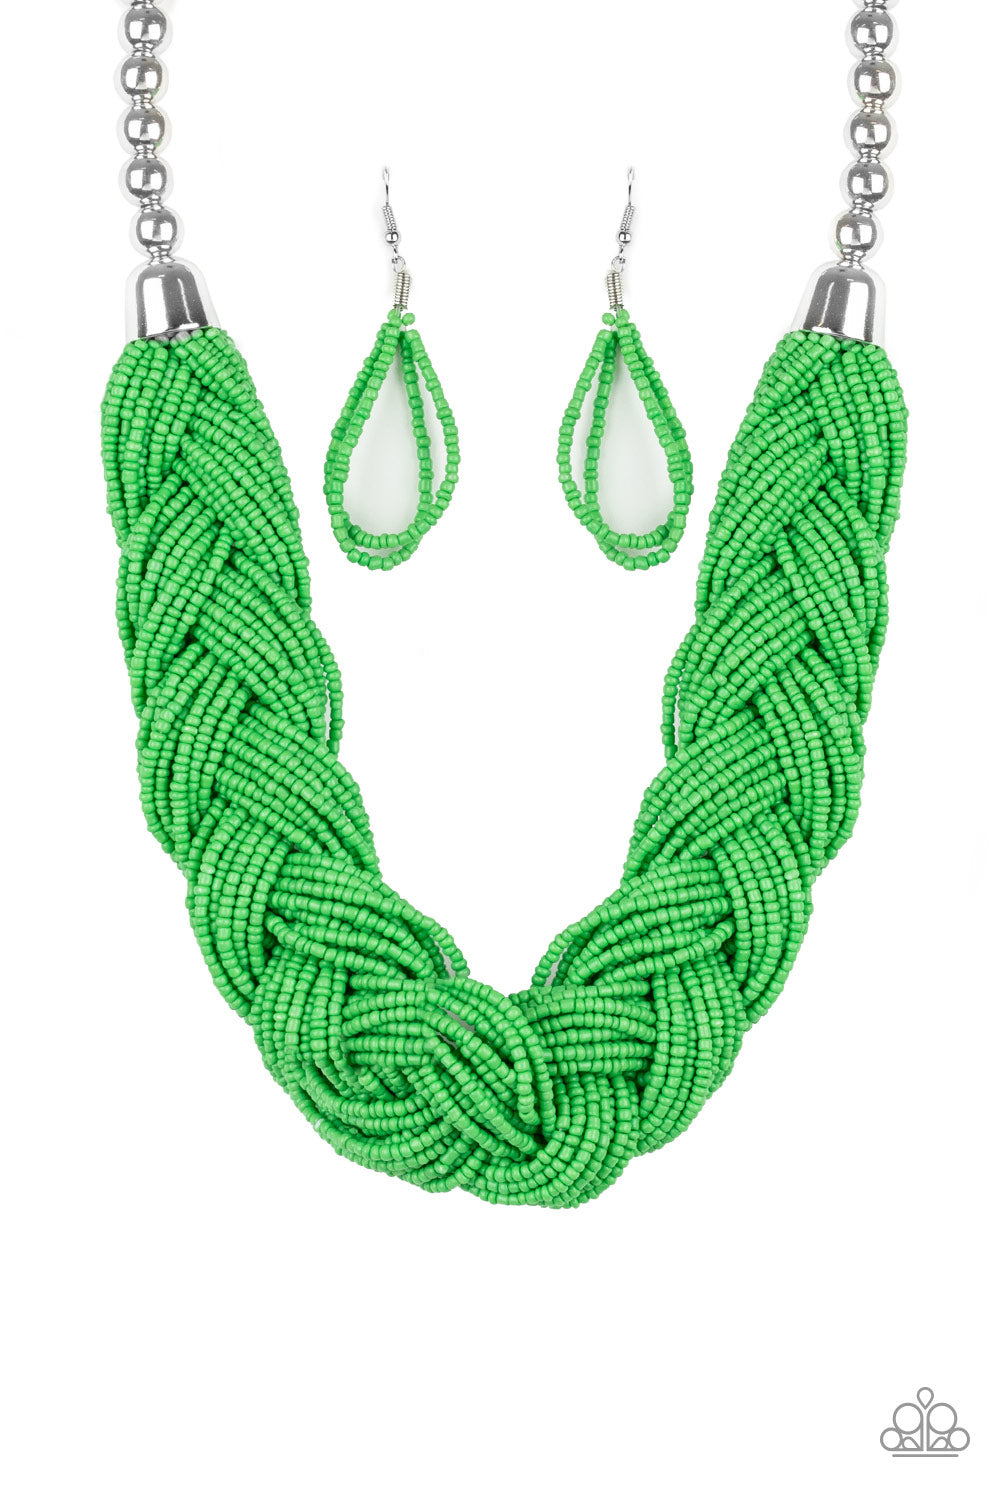 shop-sassy-affordable- the-great-outback-green-1661-paparazzi-accessories